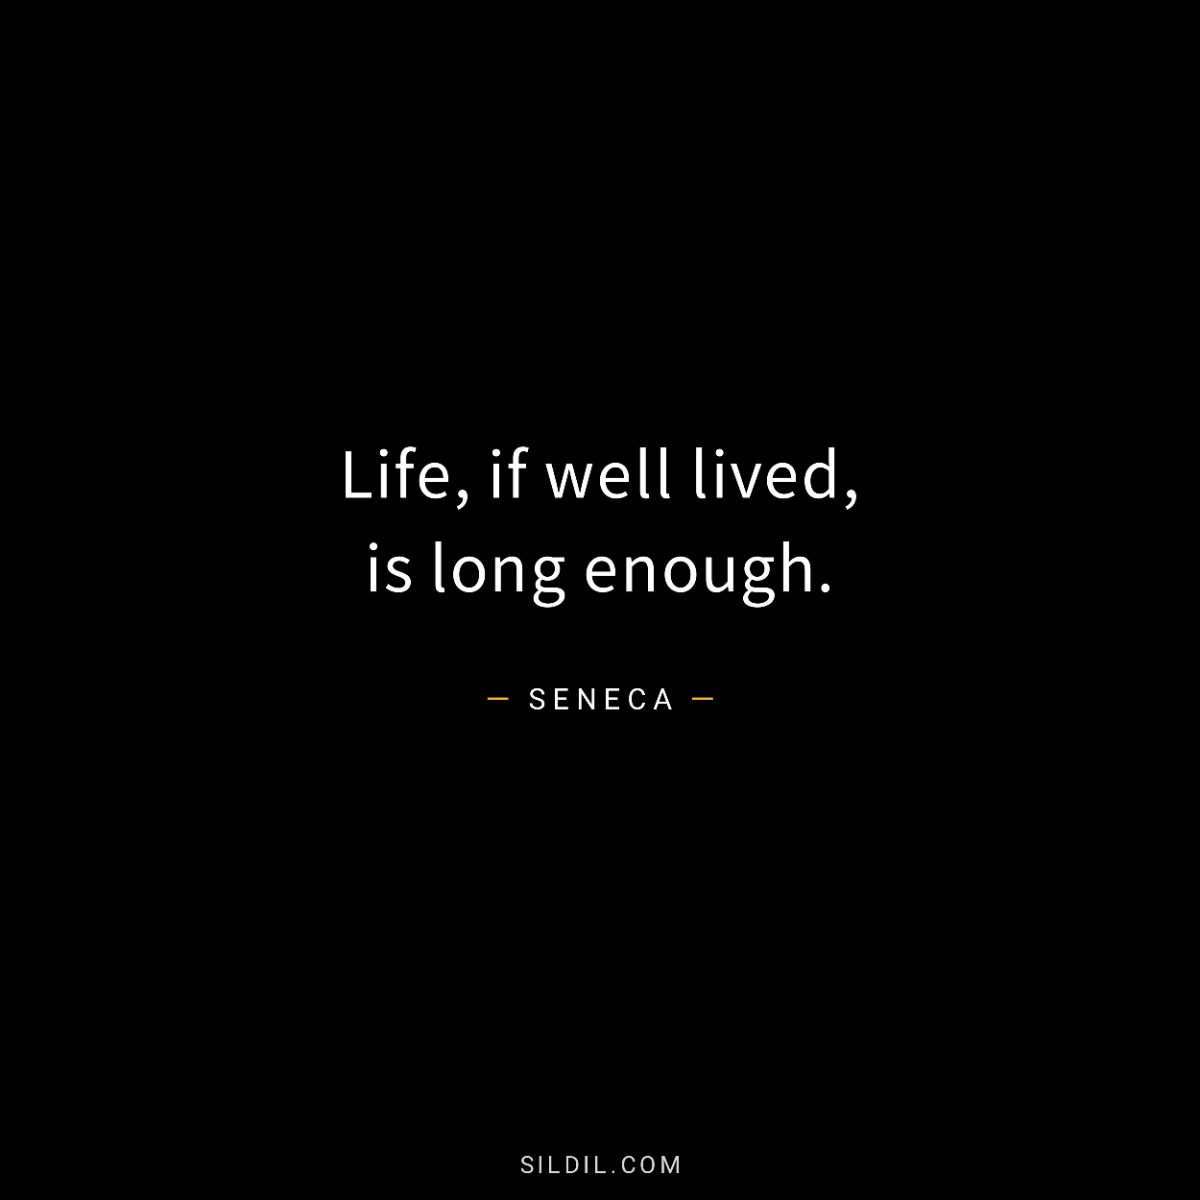 Life, if well lived, is long enough.